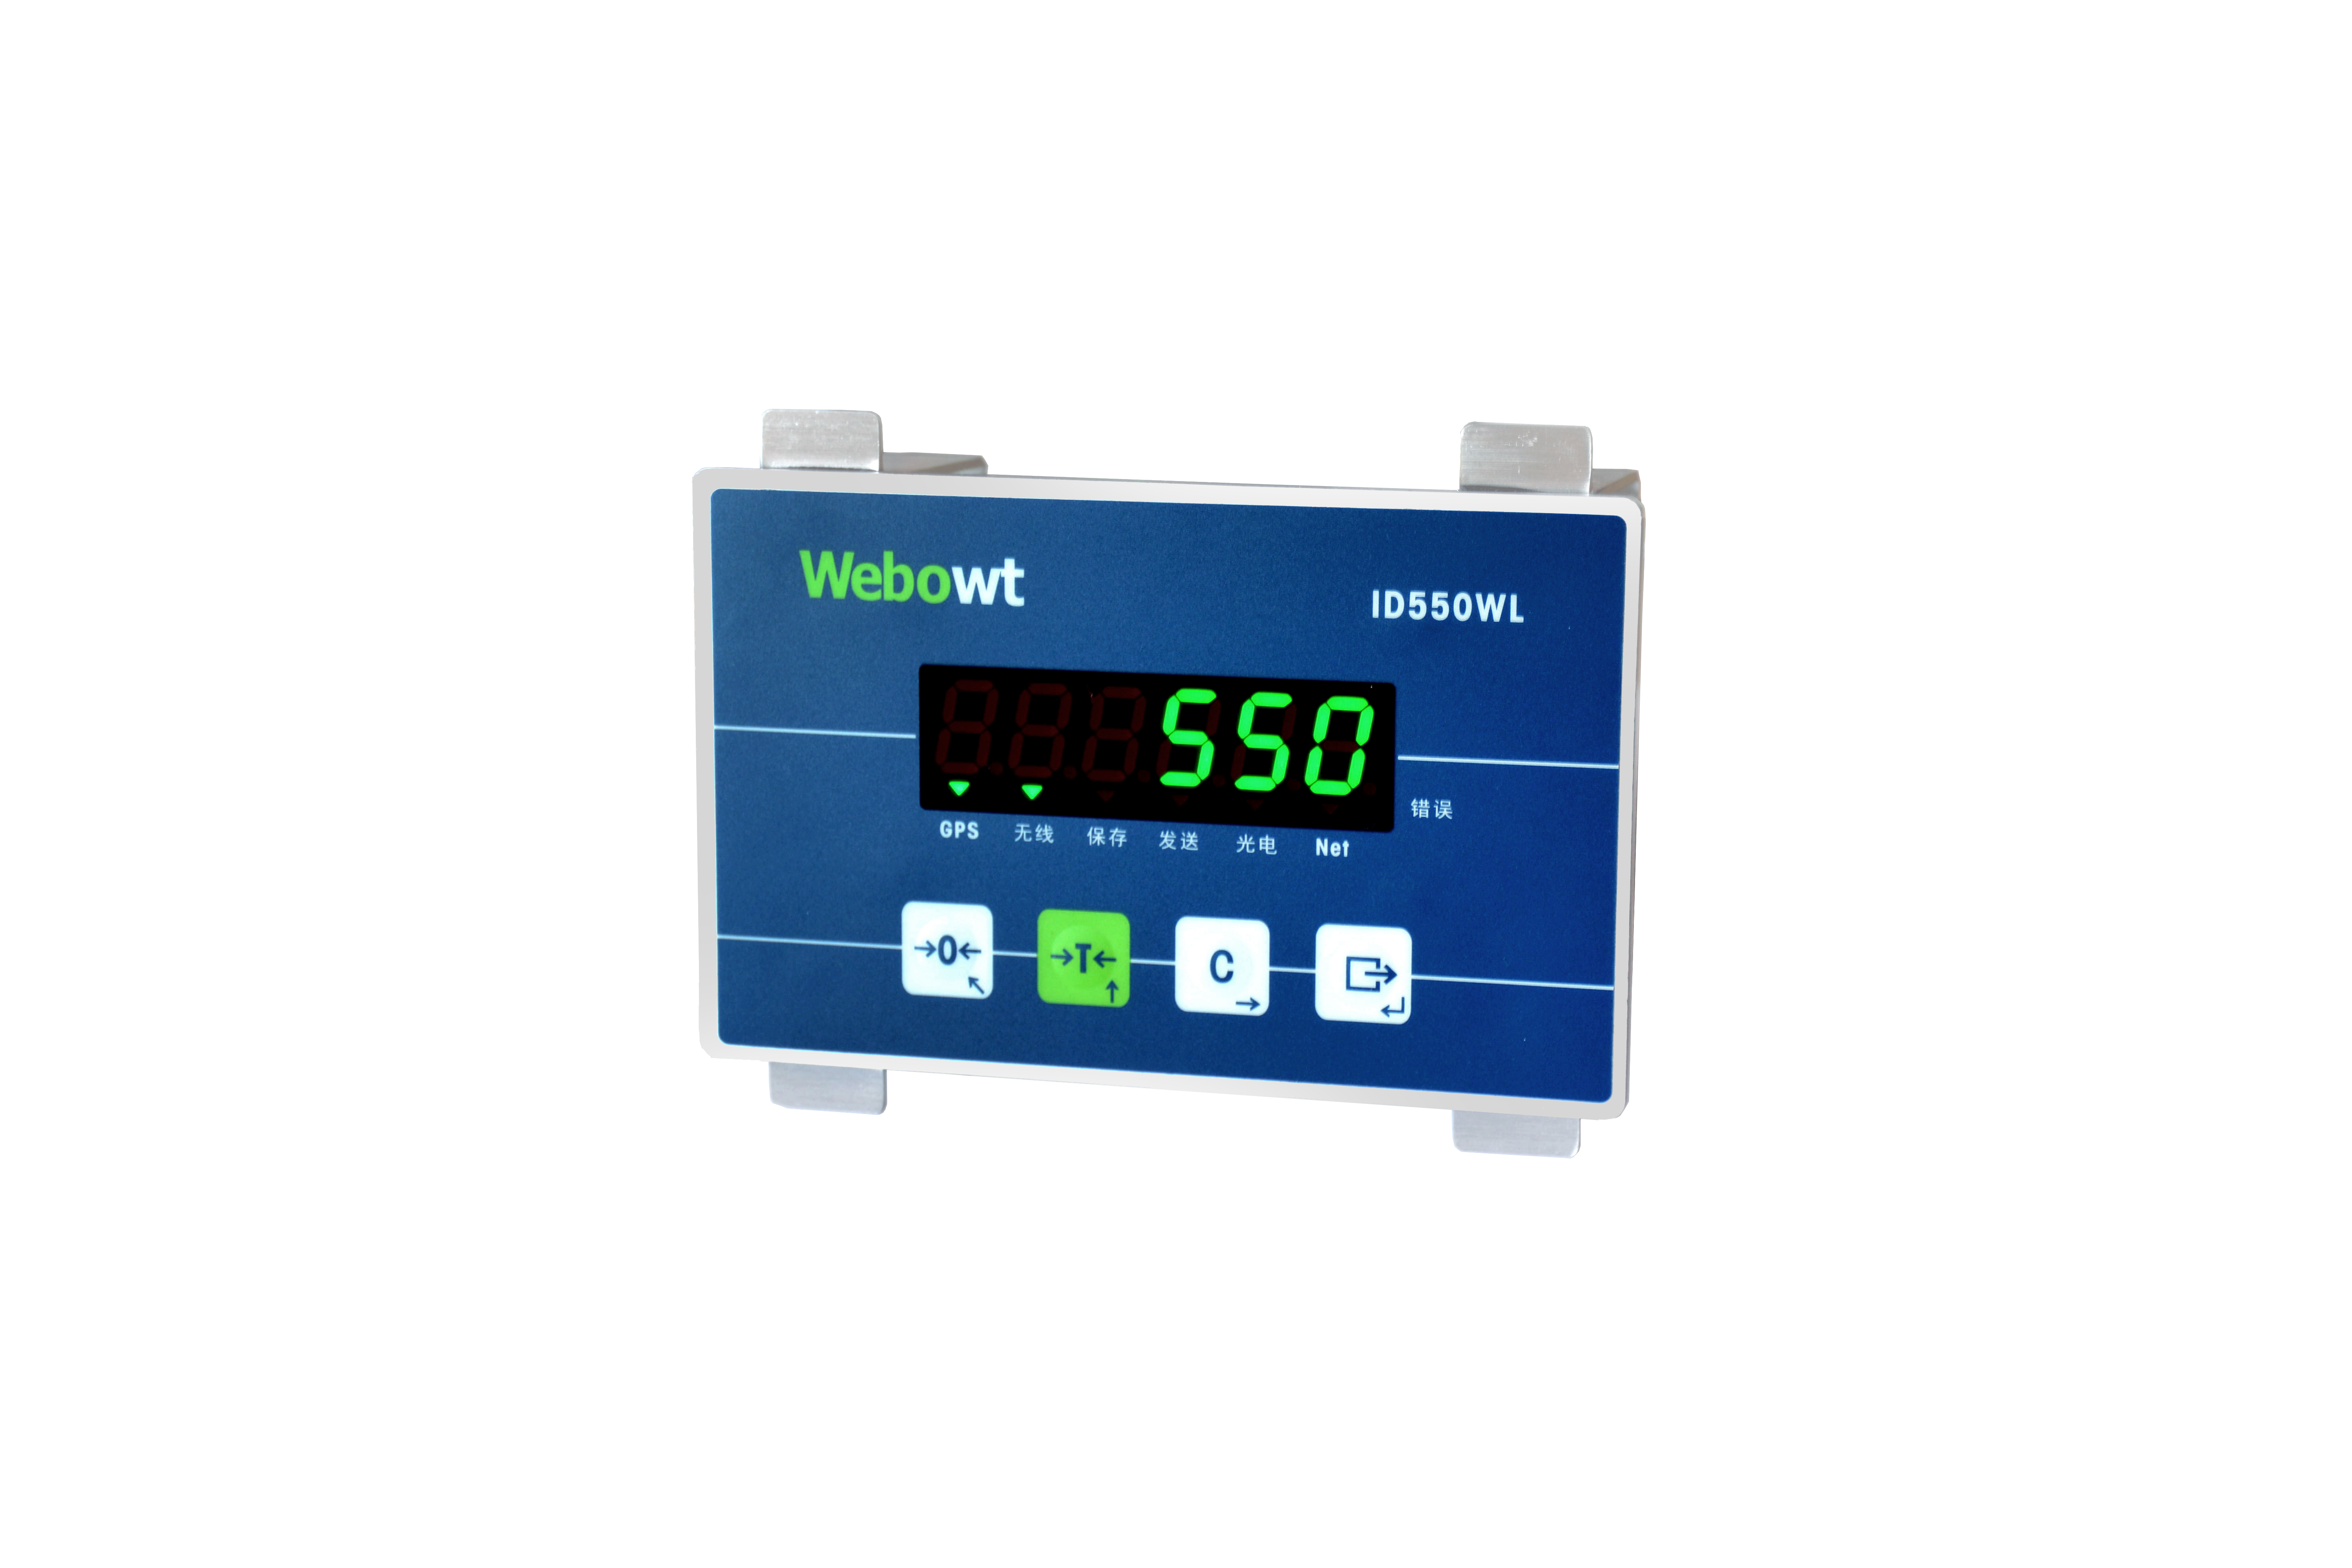 Order No. 855WL01, Model No.:ID550WLP11100D, ID550WL, Panel, Input x 1/ Output x 2, GPS, 2G, Waste truck weighing, 24VDC